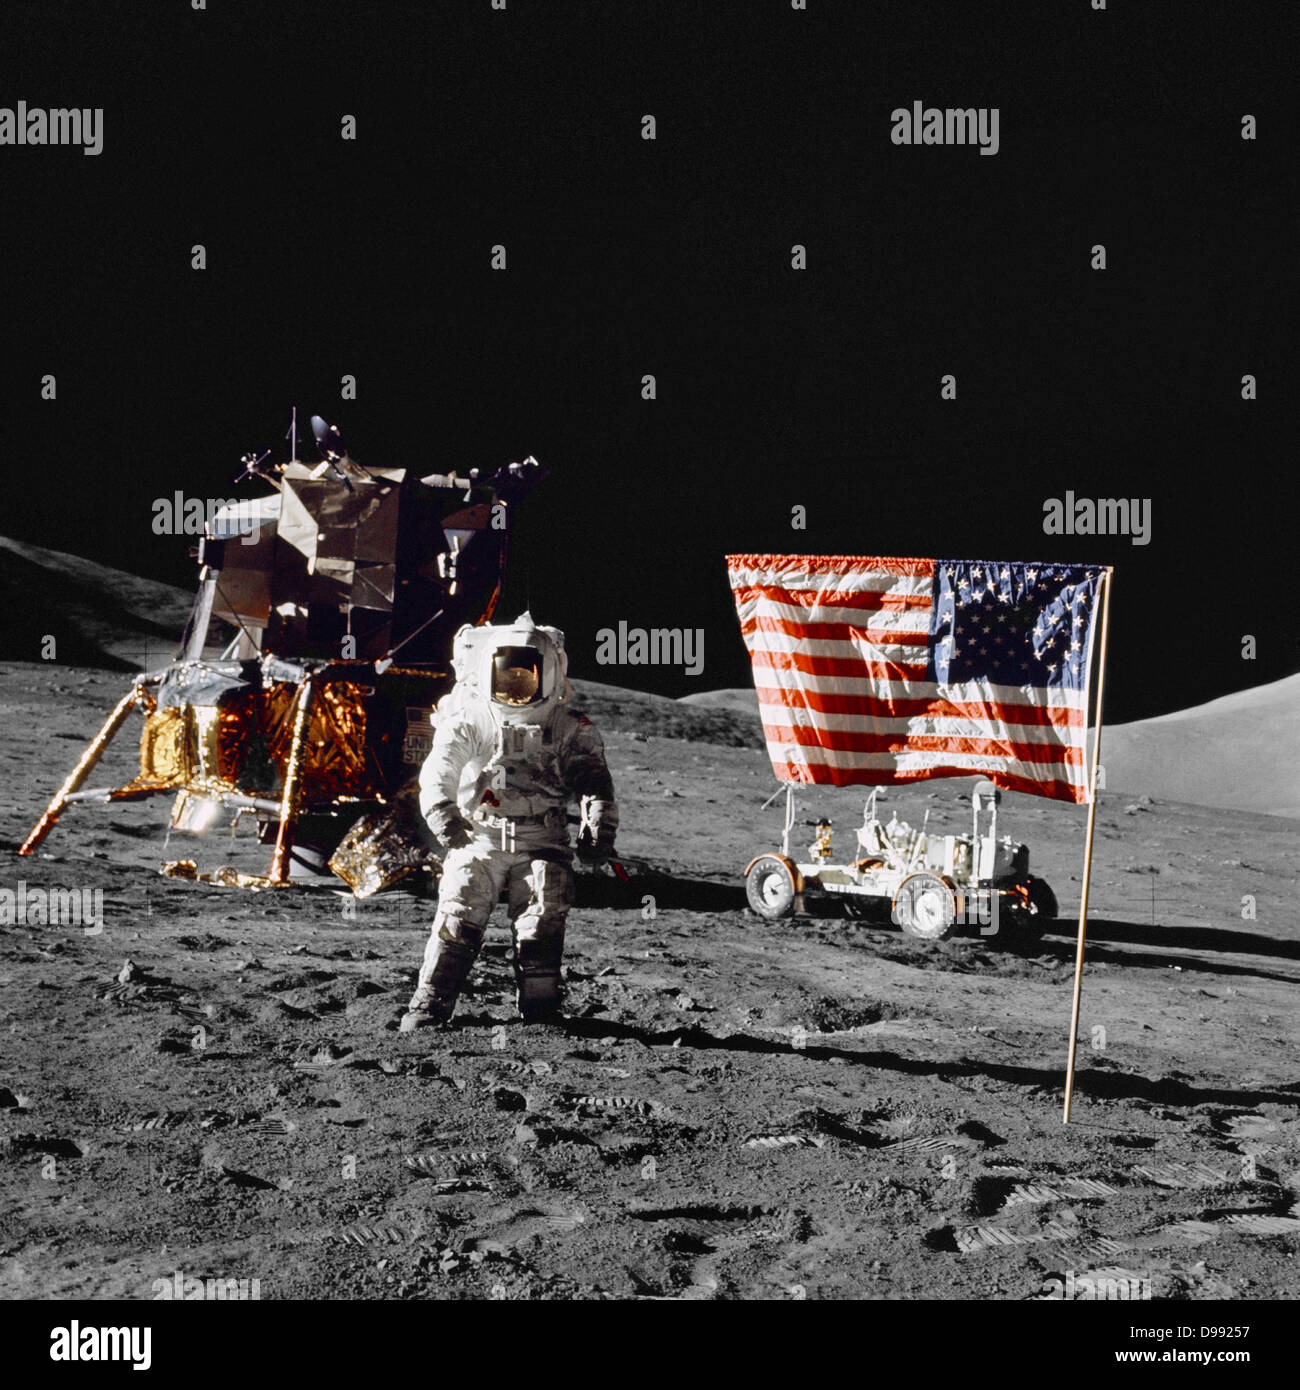 Harrison H Schmitt, pilot of the lunar module, stands on the lunar surface near the United States flag during NASA's final lunar landing mission in the Apollo series 13 December 1972. Credit: NASA. Science Astronaut Space Travel Stock Photo